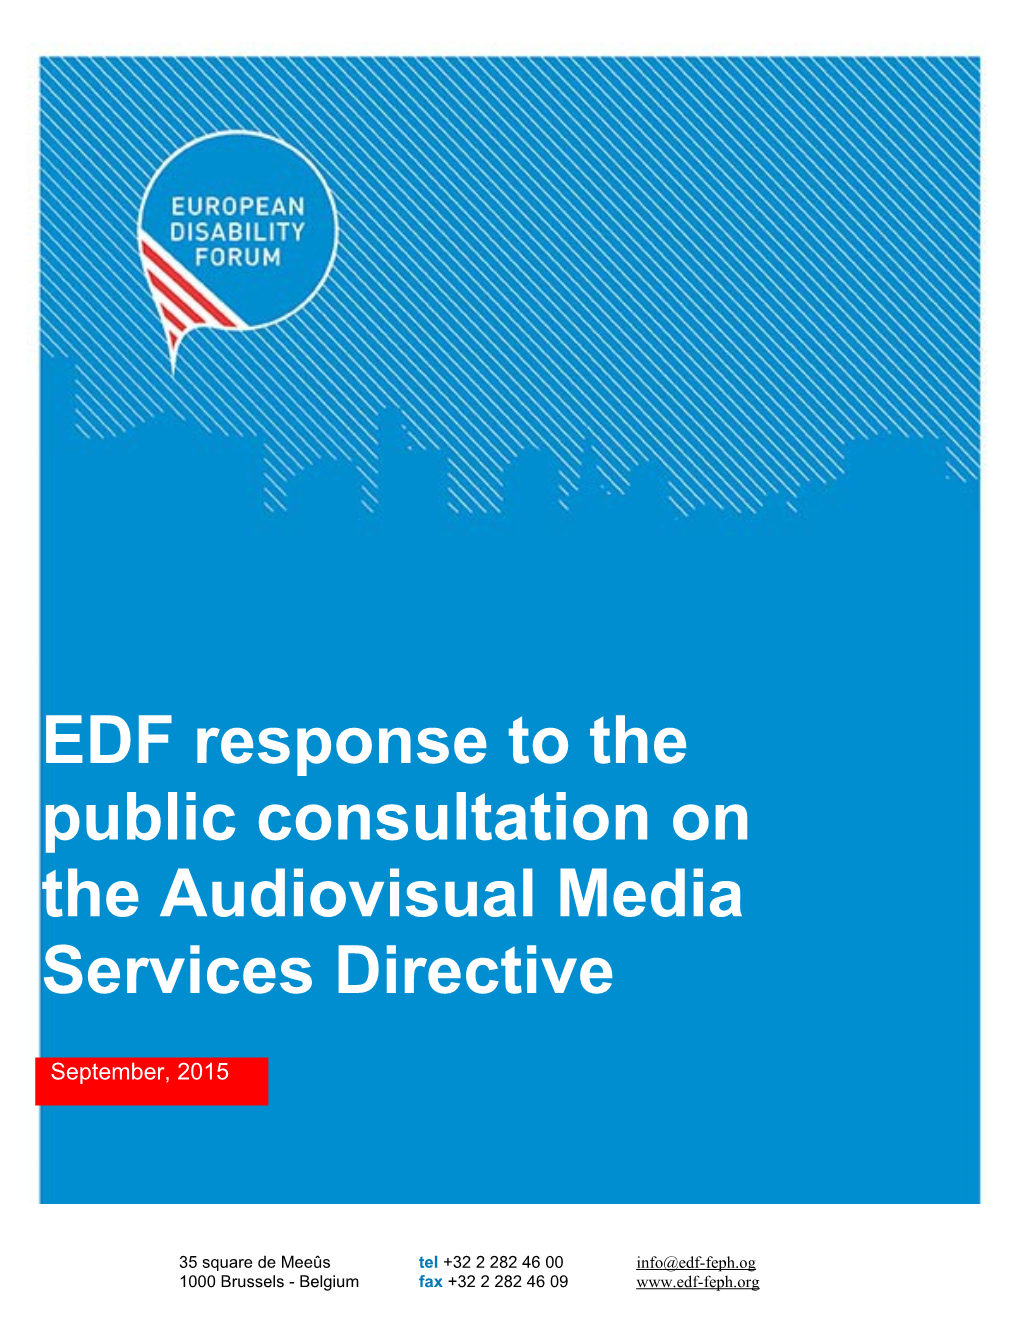 On the Audiovisual Media Services Directive